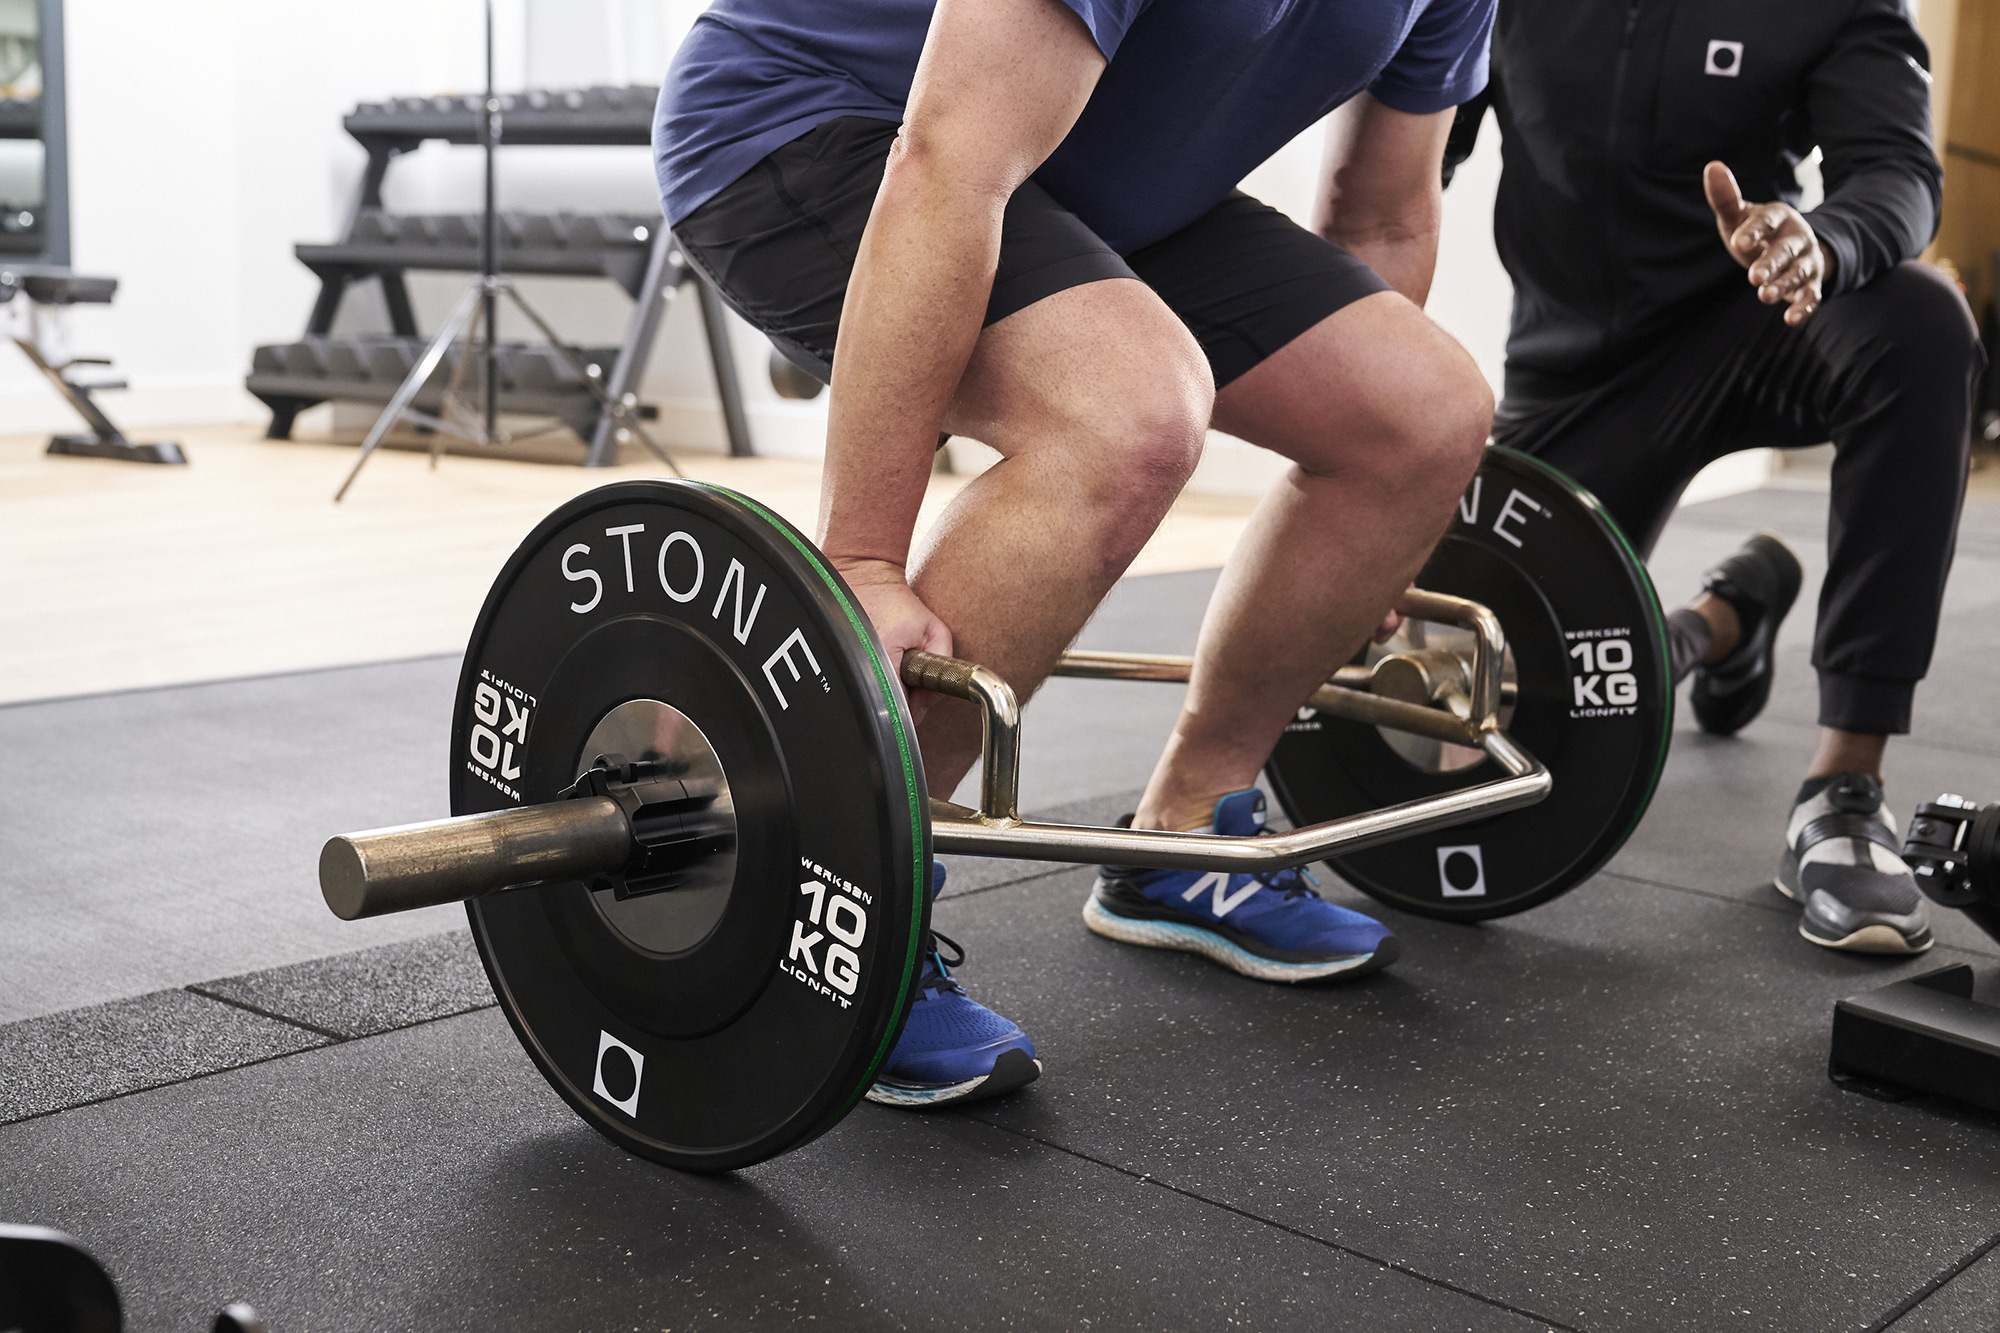 STONE London is currently helping people reach their fitness goals online